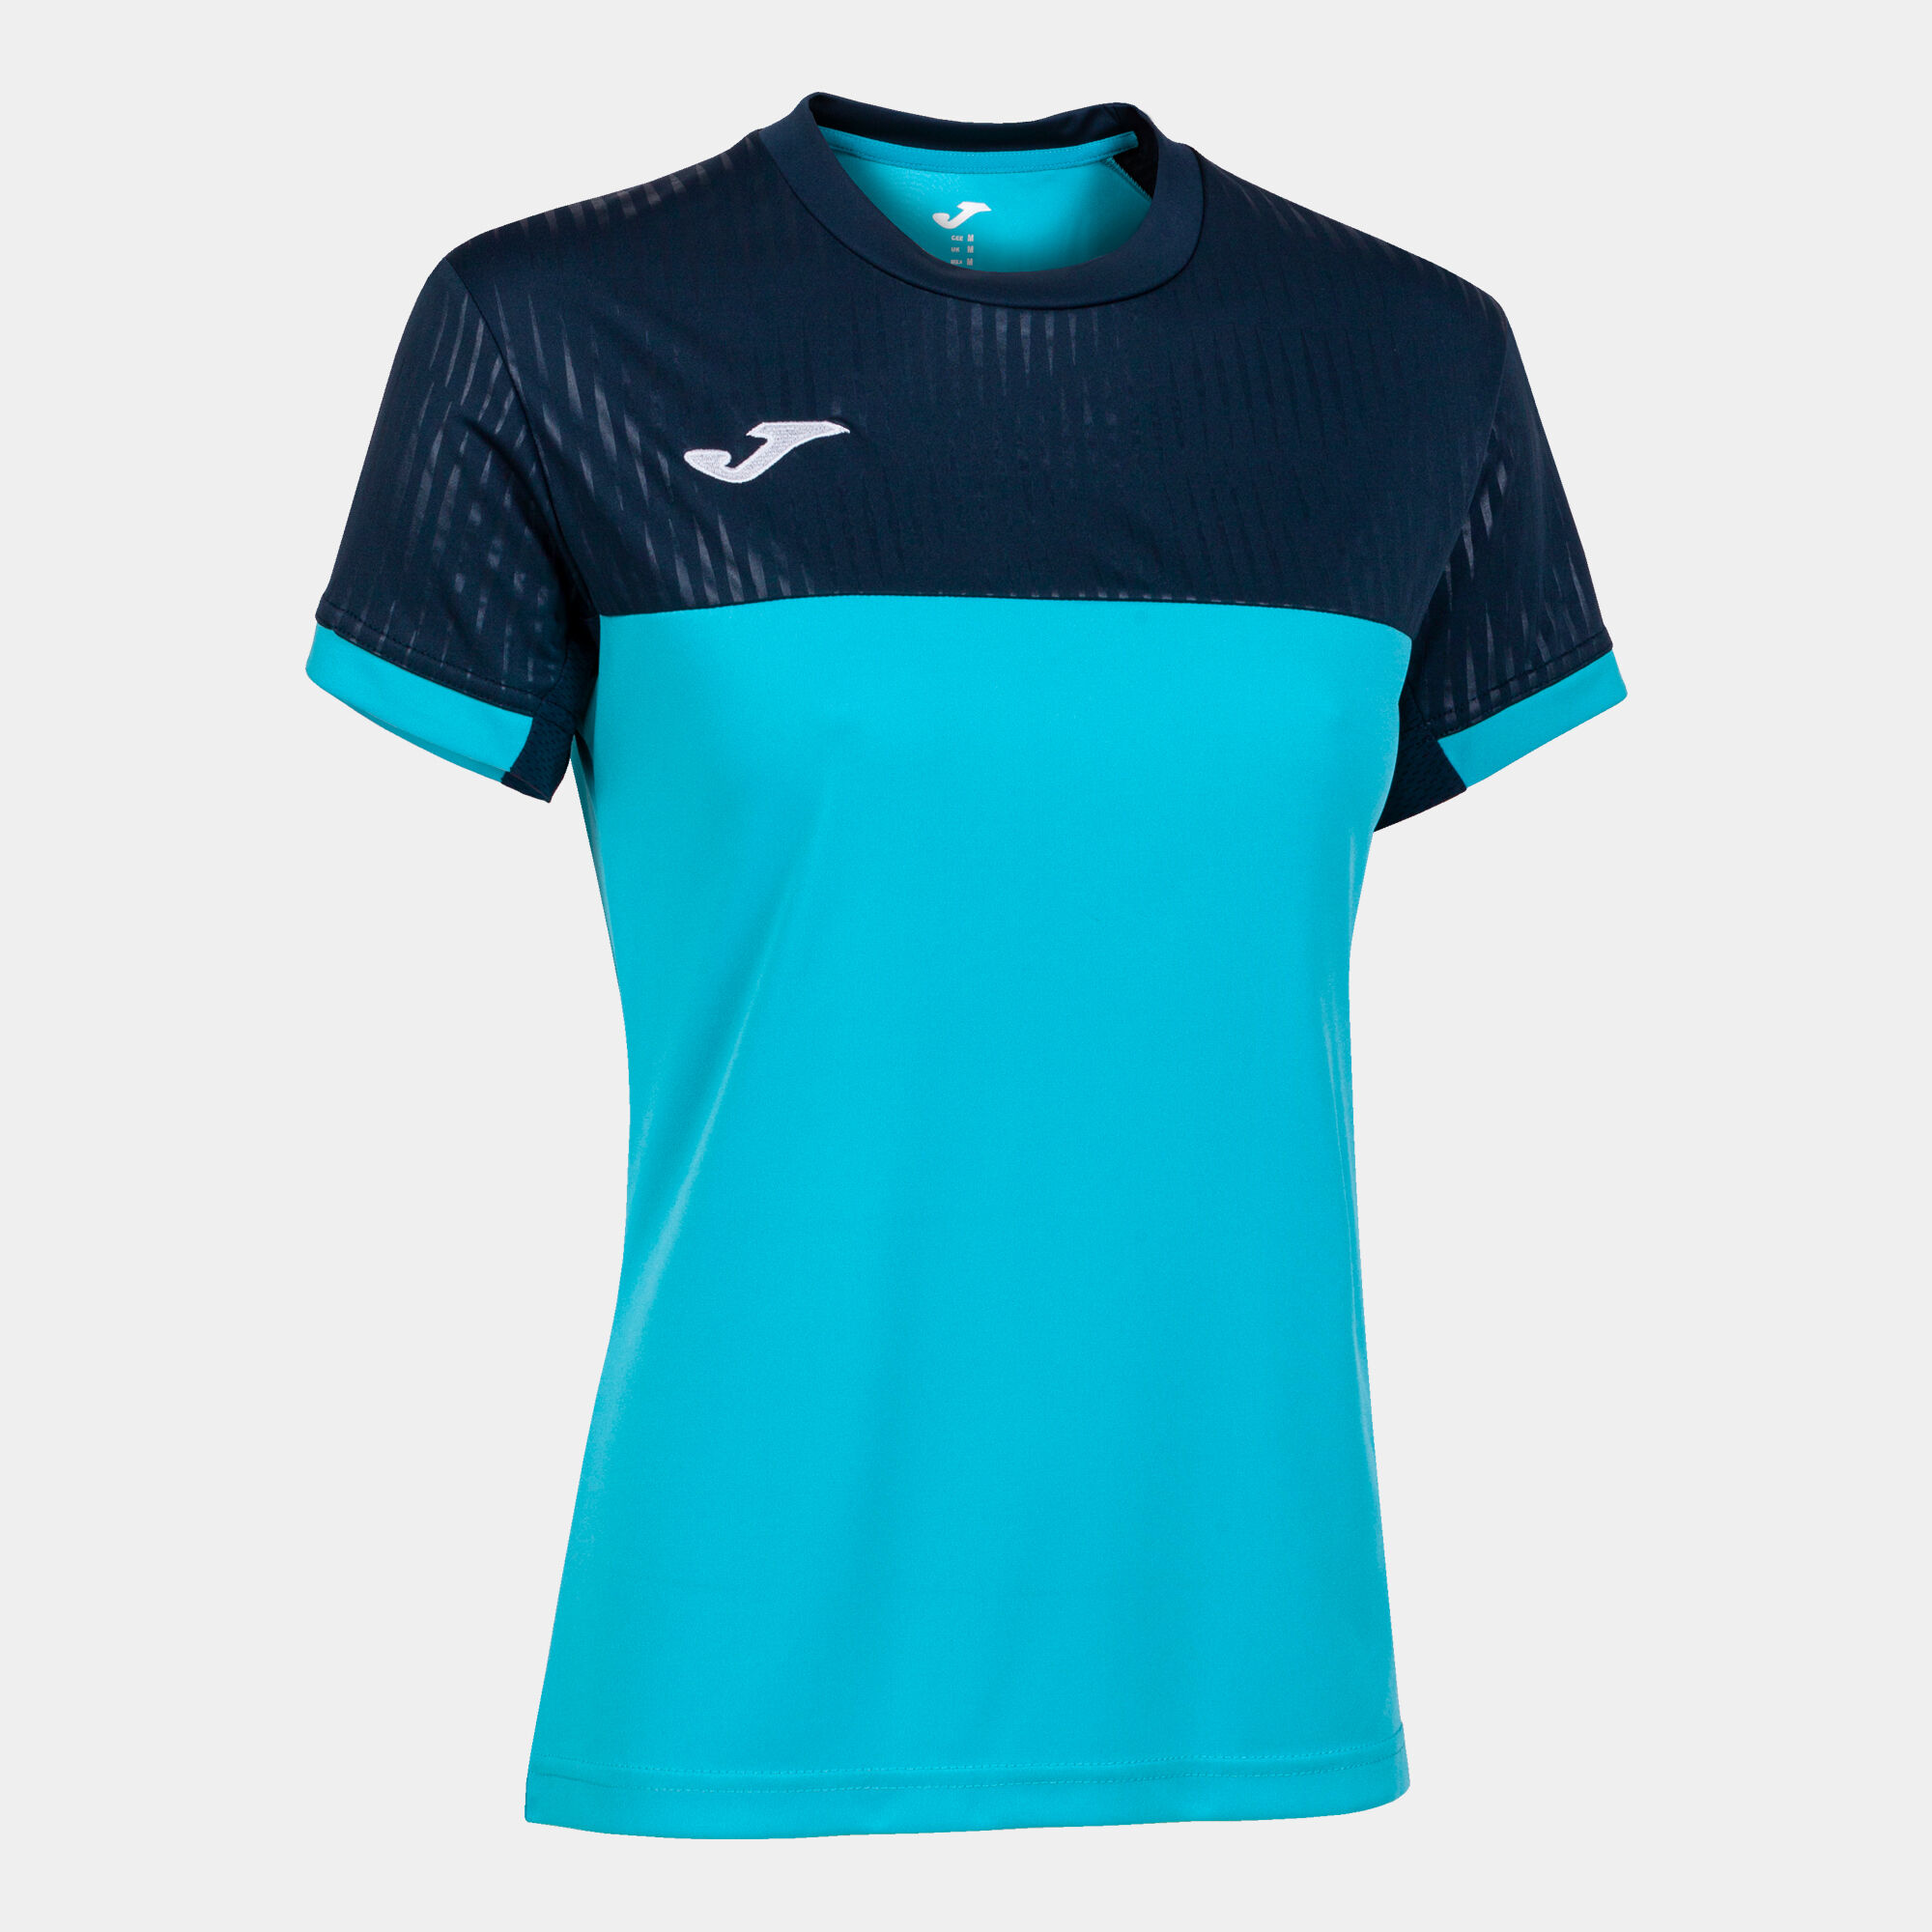 MAILLOT MANCHES COURTES FEMME MONTREAL TURQUOISE FLUO BLEU MARINE